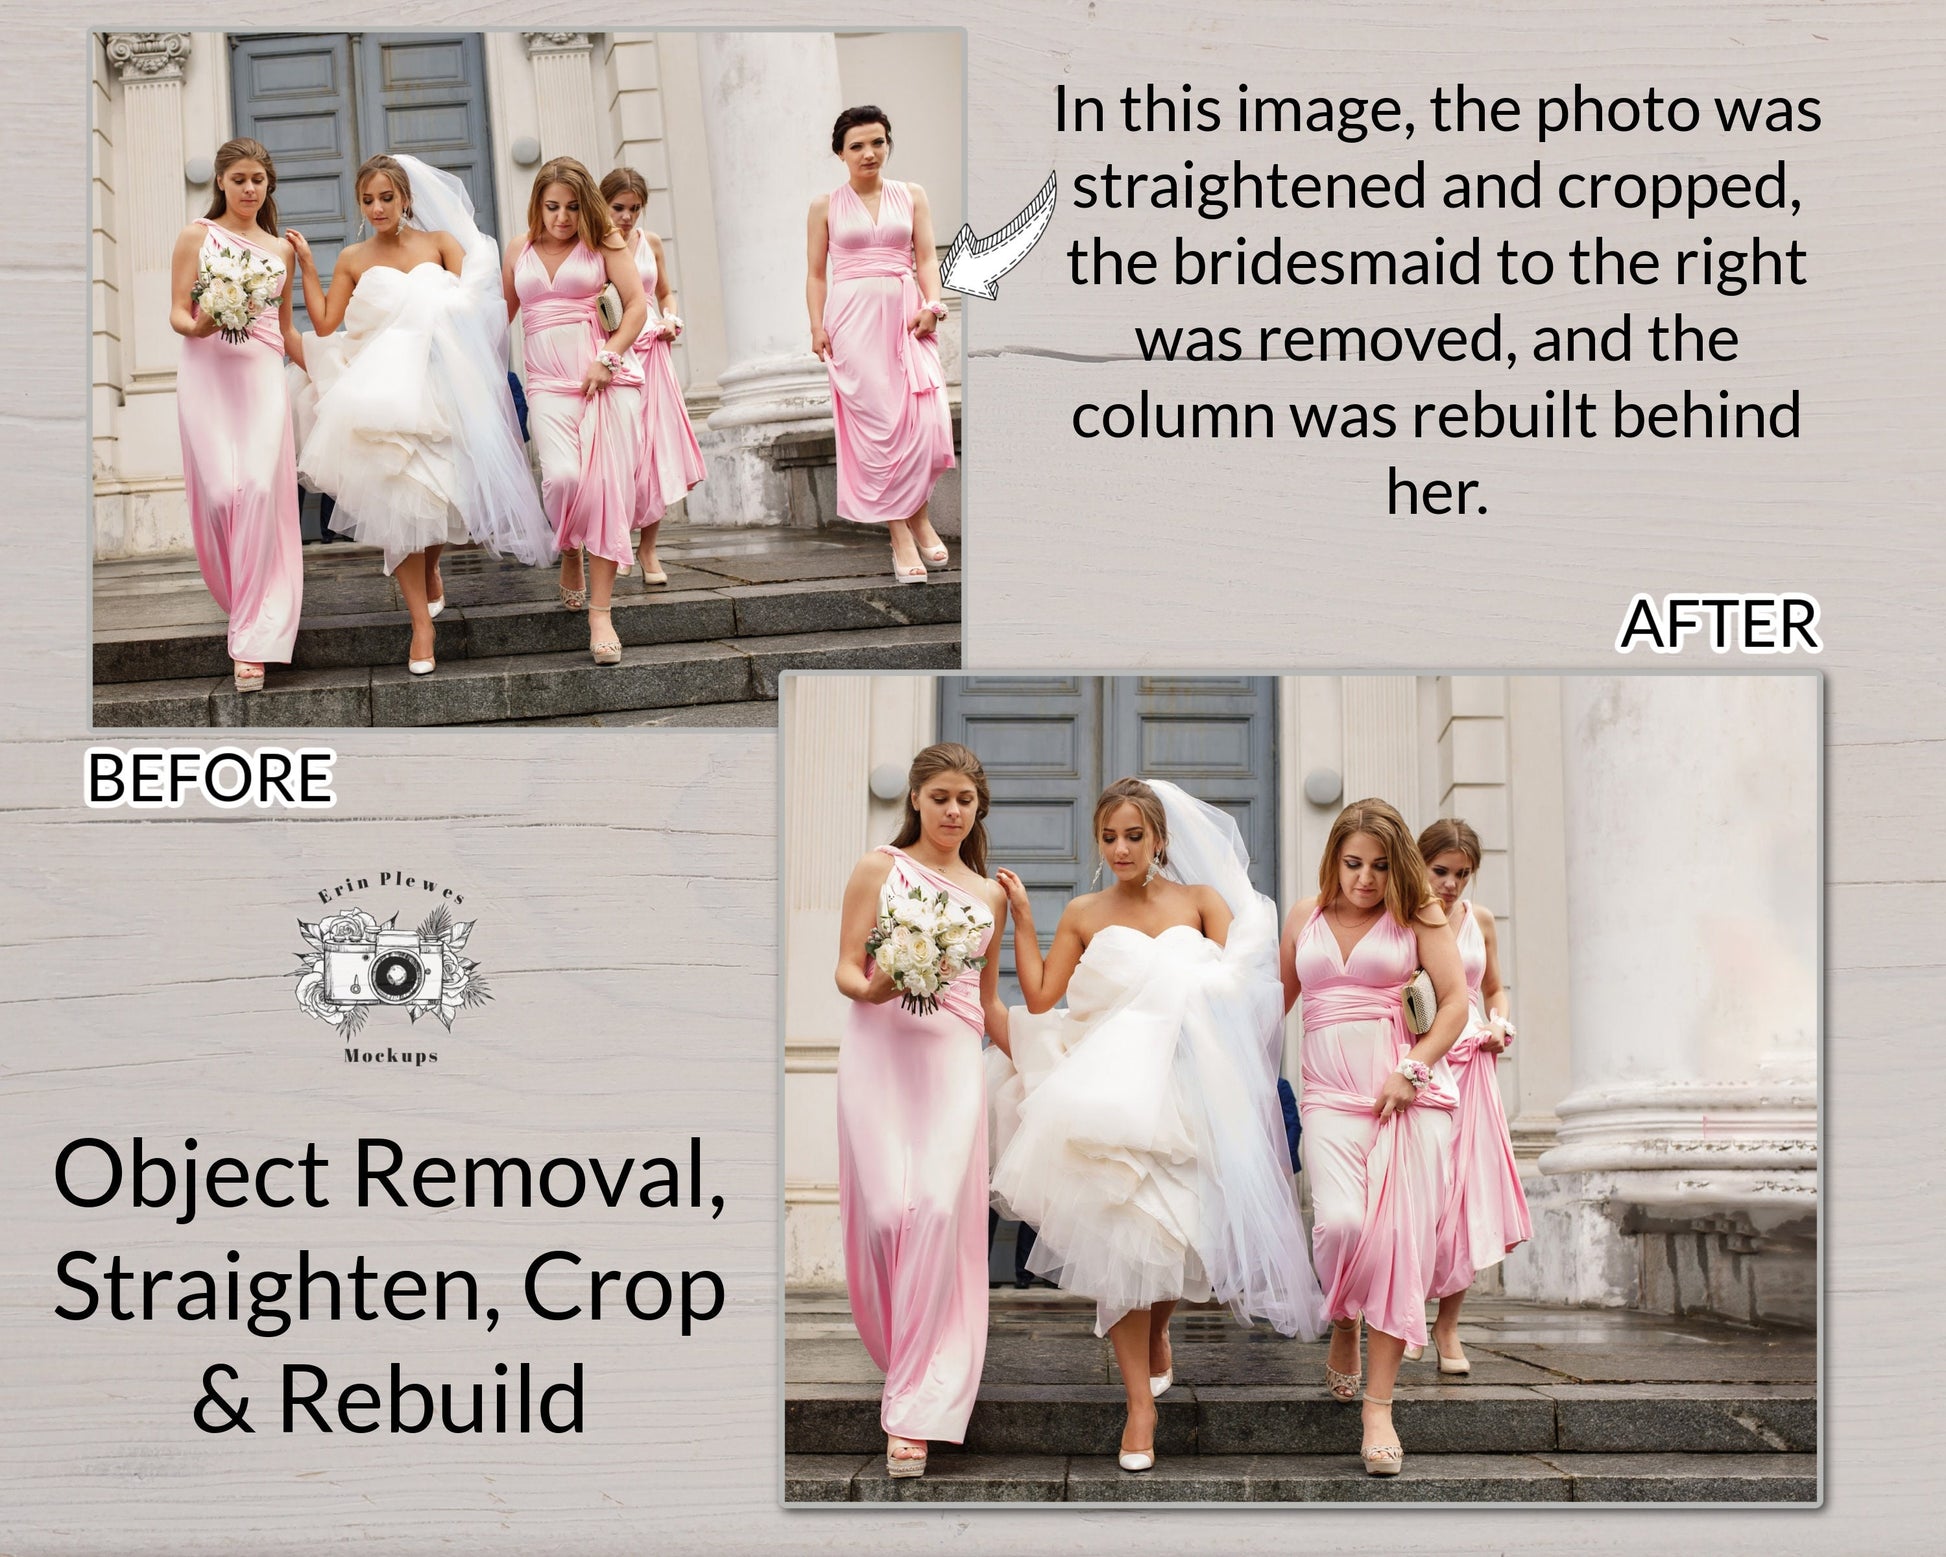 Photoshop Services, Add loved one to your photo, Object Removal, Person Removal, Photo Merge, Photoshop Deceased, Level 10